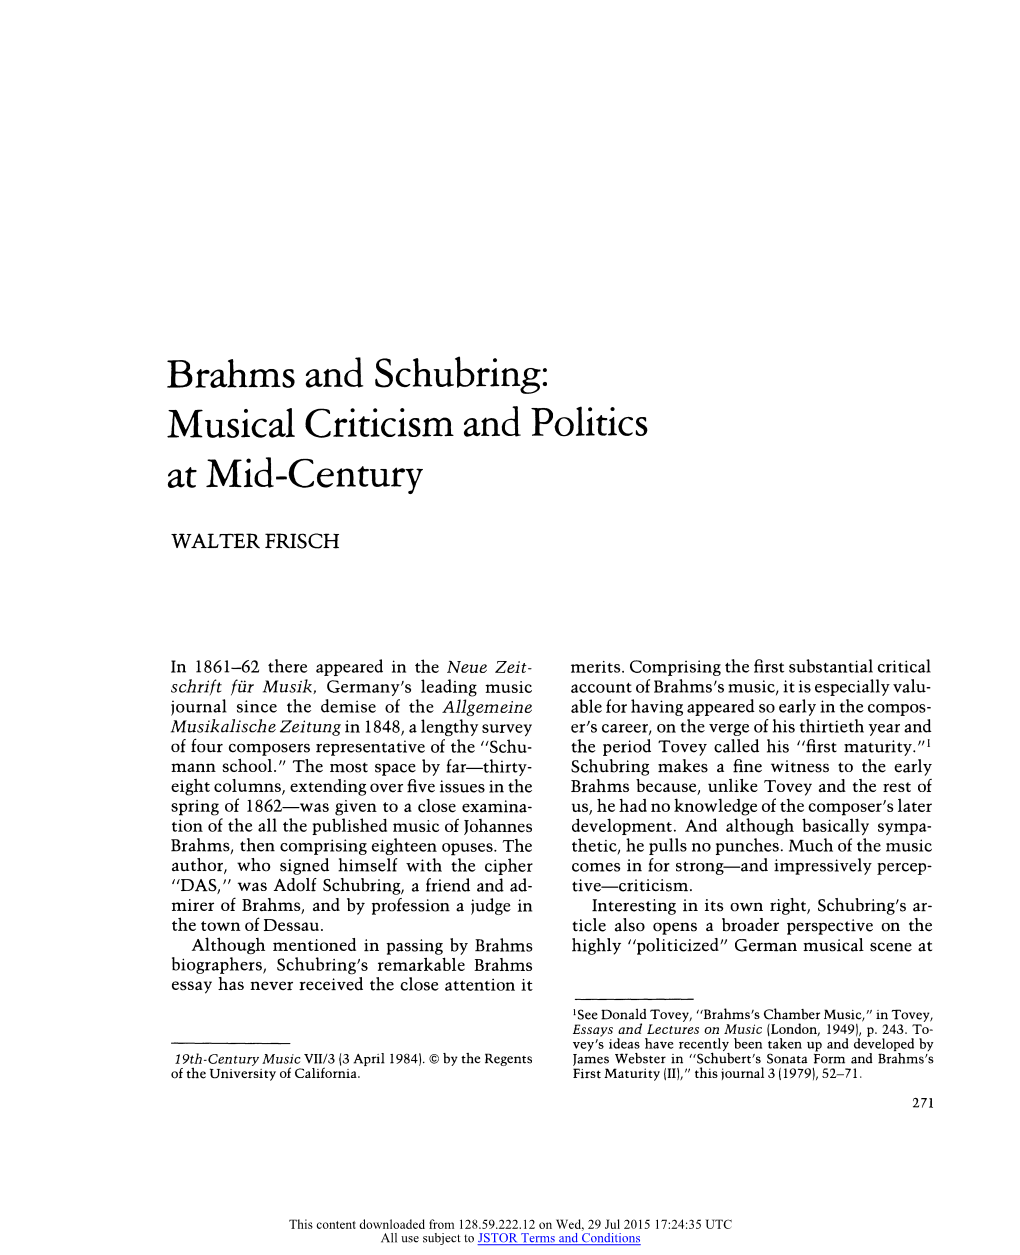 Brahms and Schubring: Musical Criticism and Politics at Mid-Century